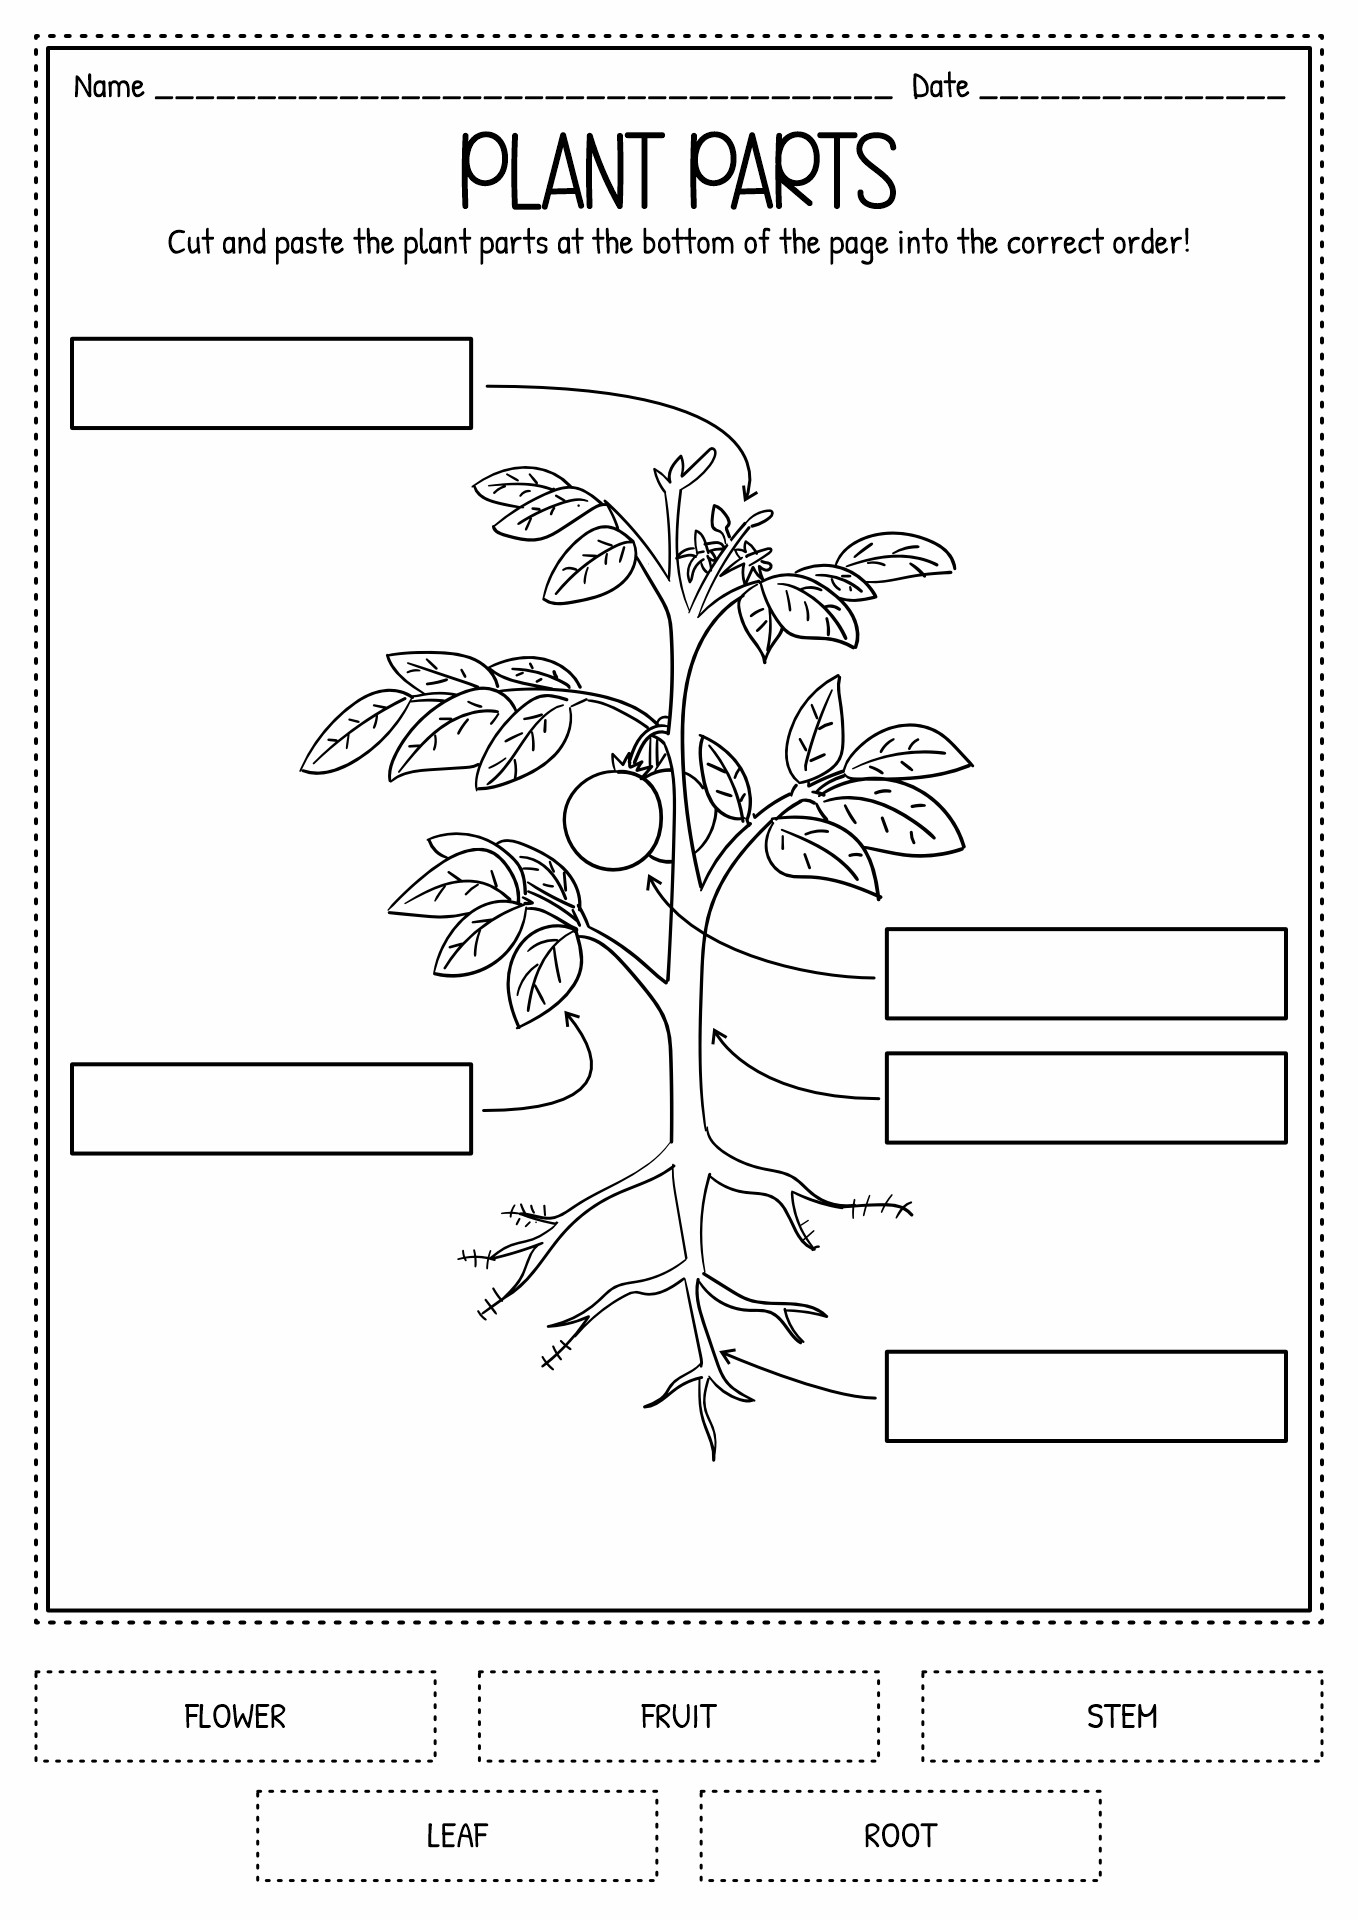 Cut and Paste Plant Parts Worksheet